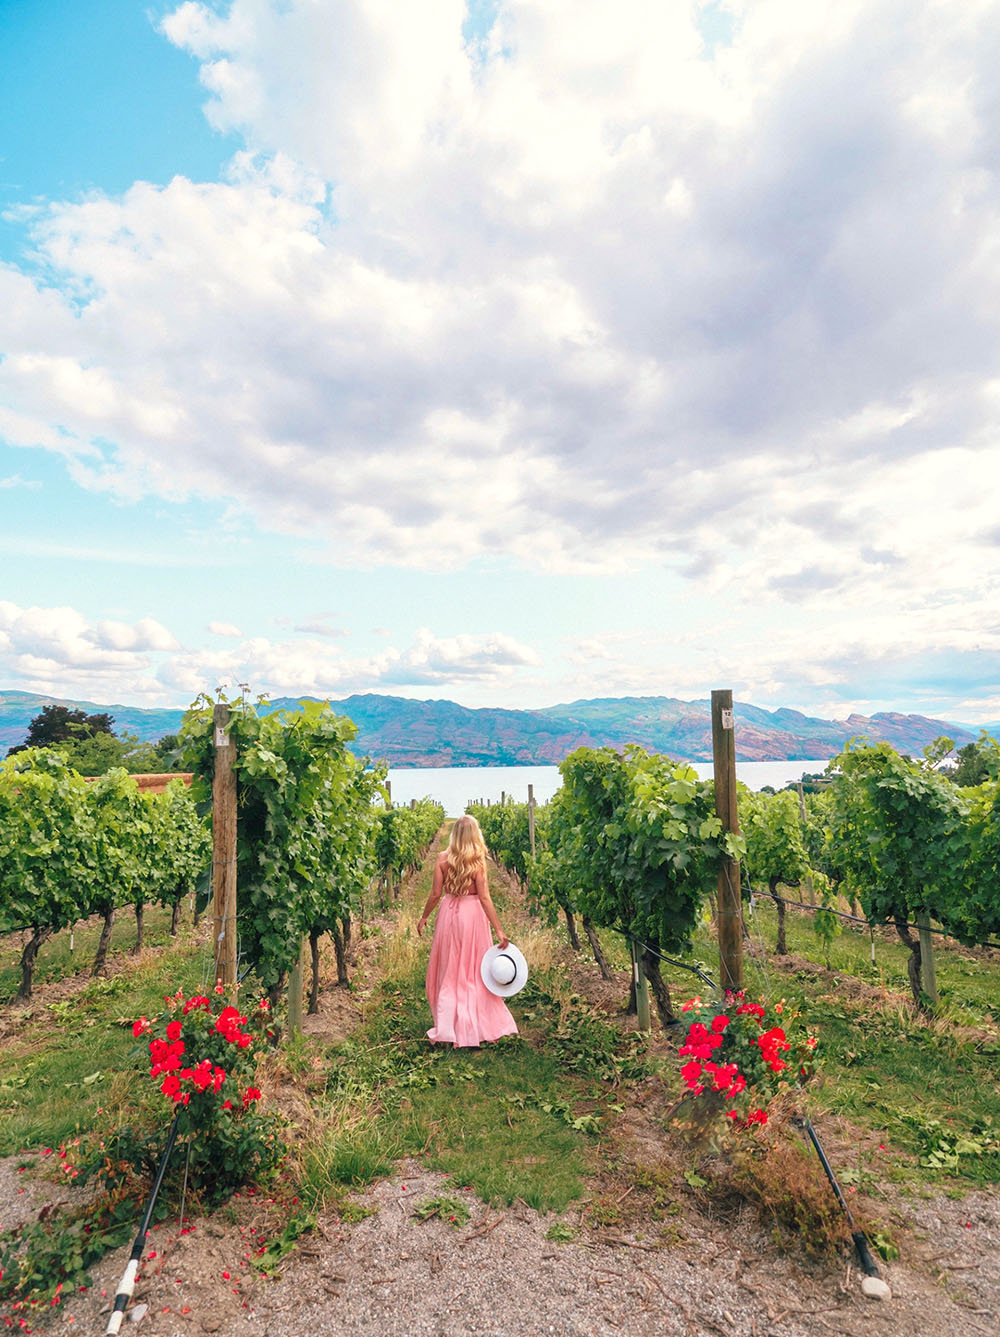 If you're heading to the Okanagan soon and planning on spending time in Kelowna, you don't want to miss this guide to the best wineries in Kelowna! From organic wineries to wineries with the best view, this guide will help you plan your visit to Kelowna’s incredible wine region. Pictured here: Quails Gate Estate Winery